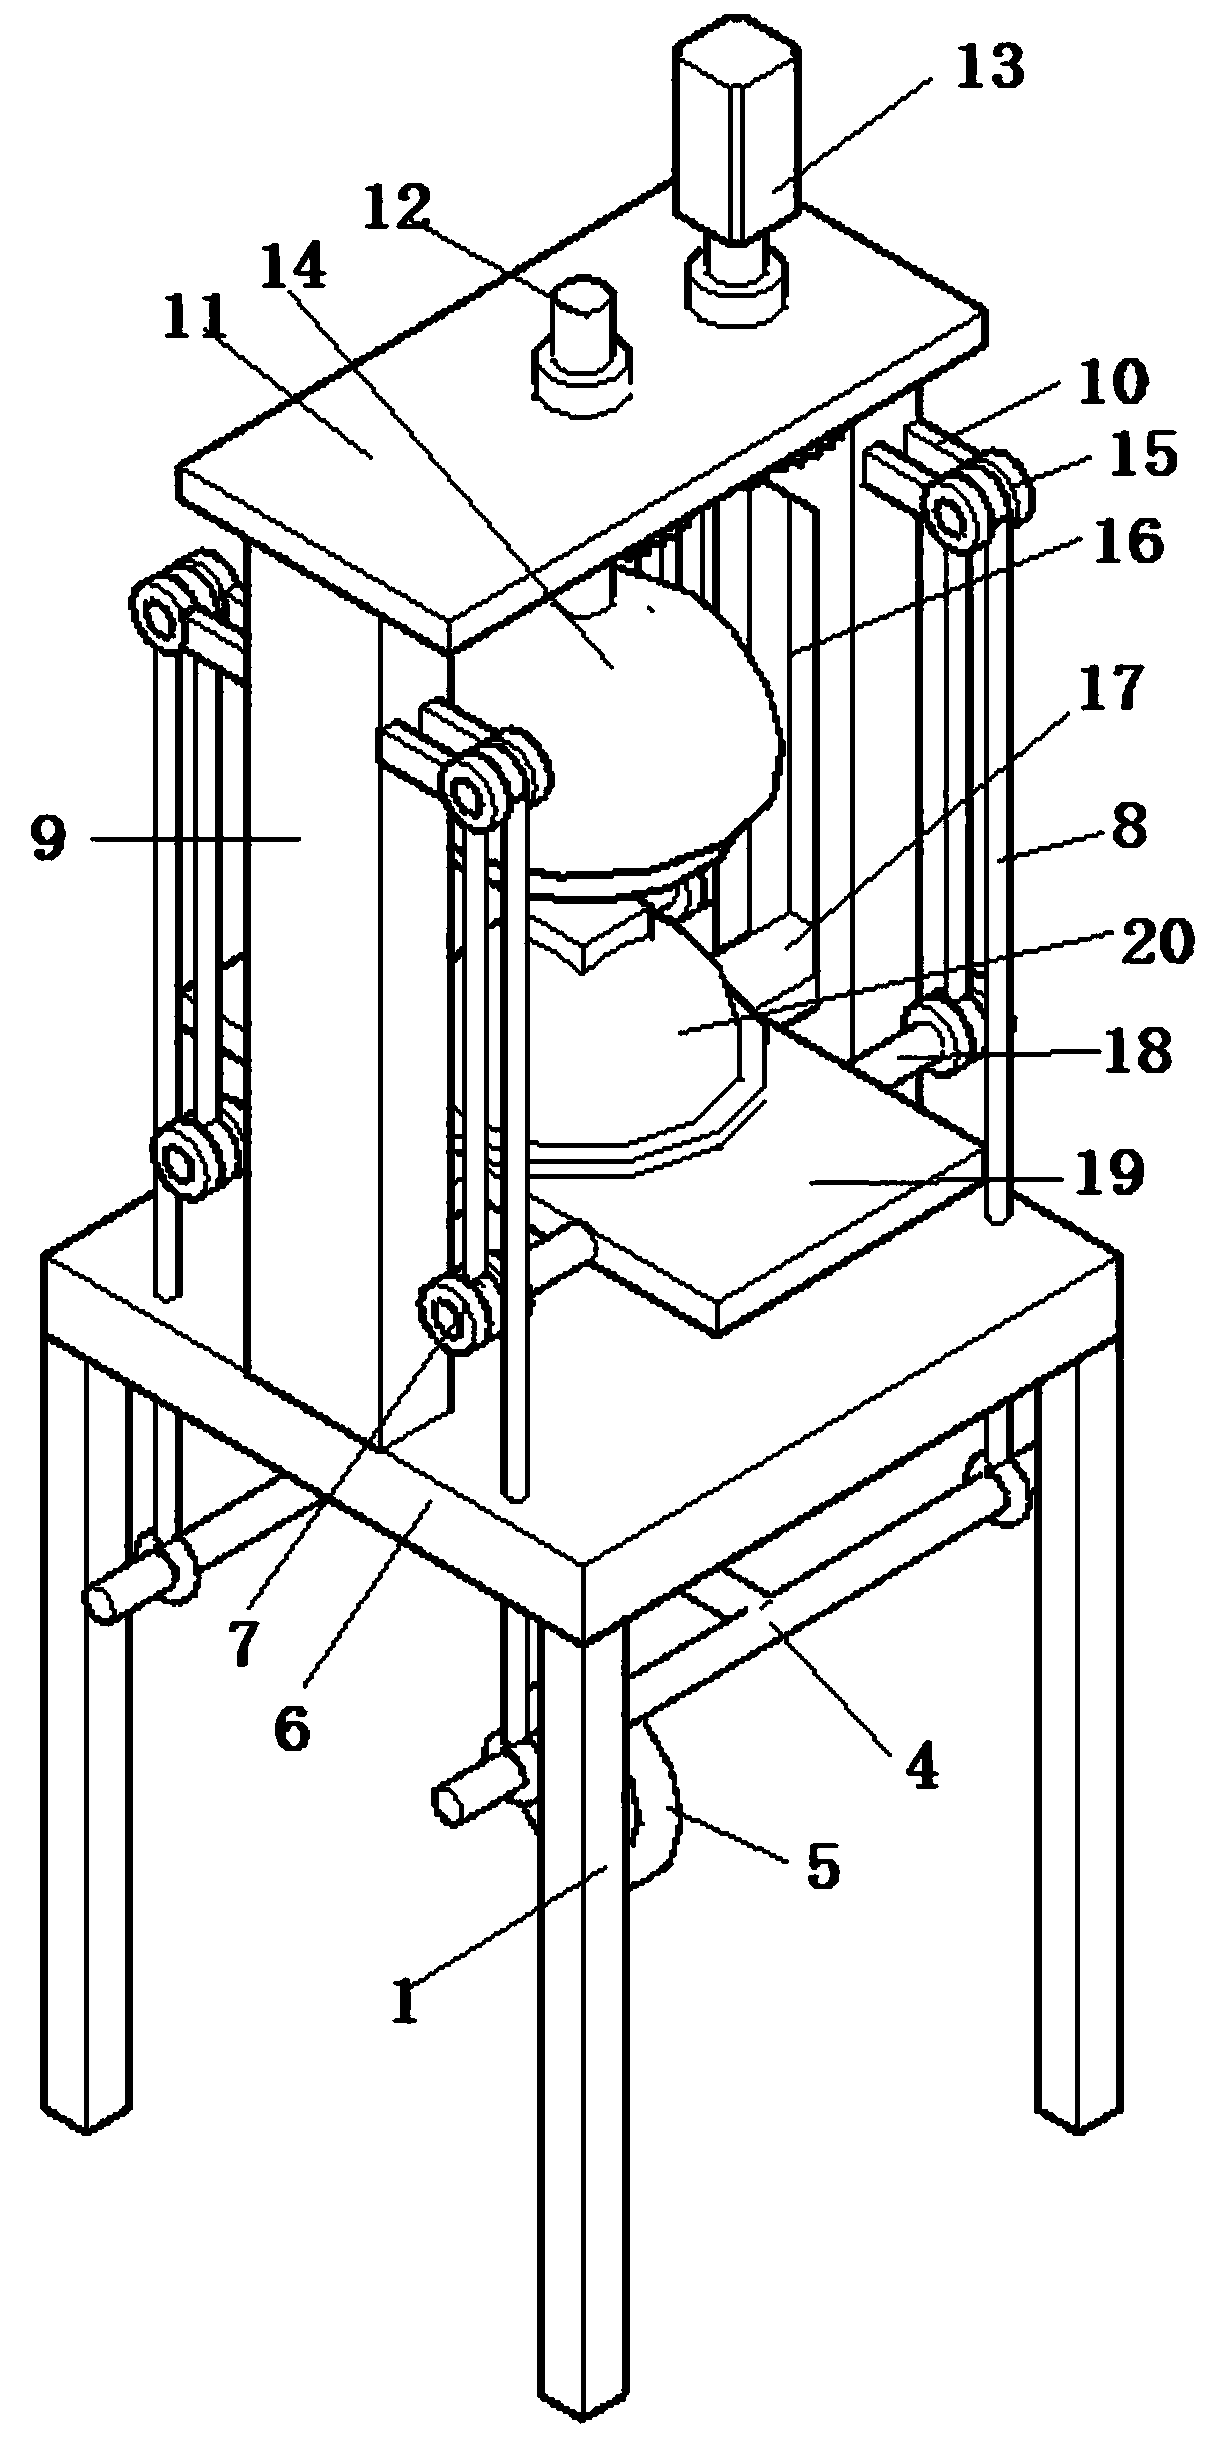 Corner cutting device for plastic bowl processing